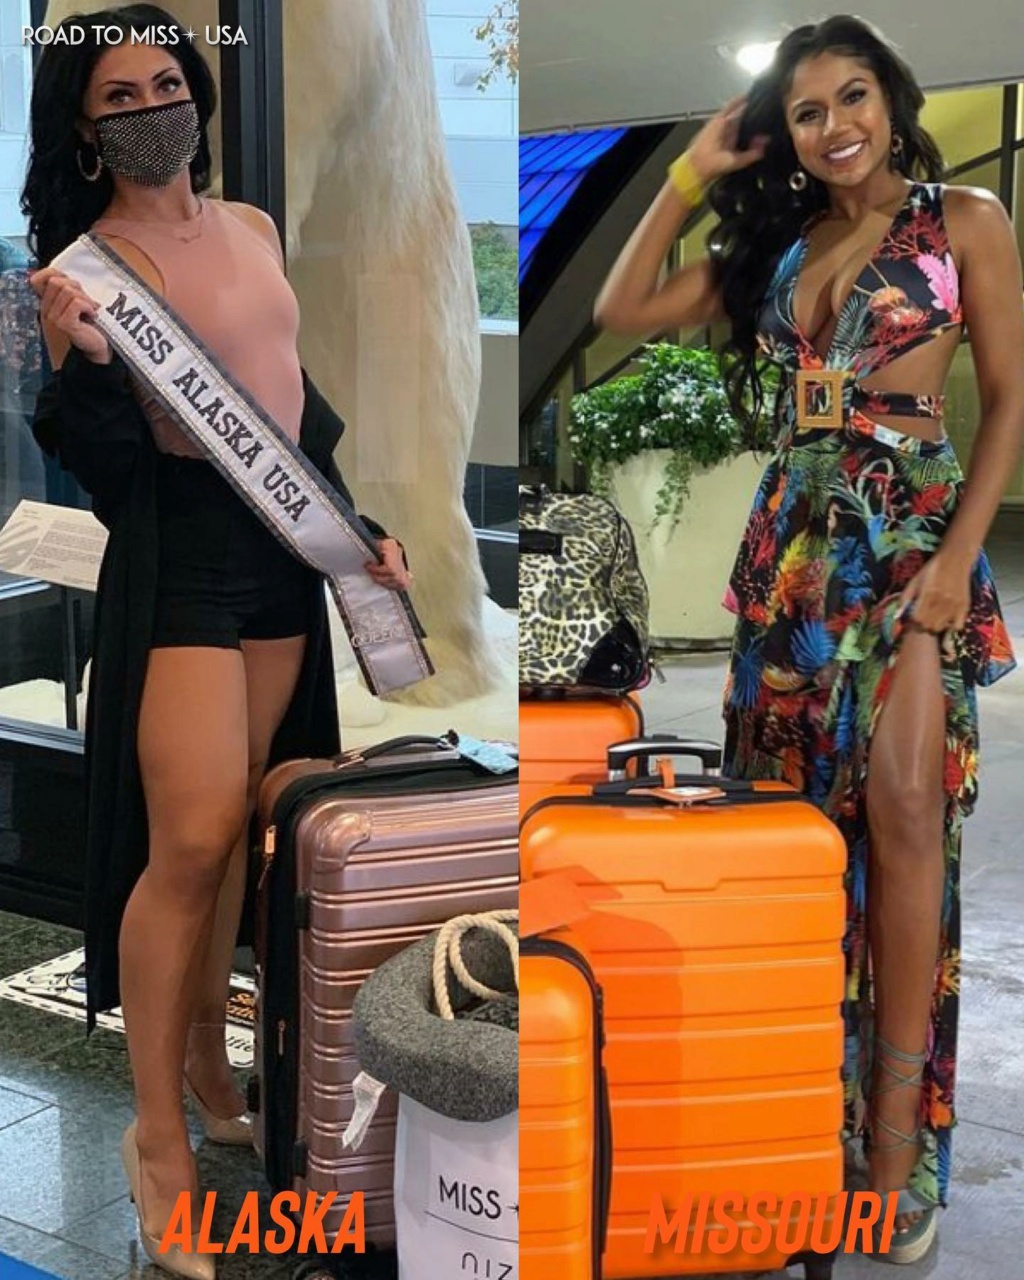 ROAD TO MISS USA 2021 is KENTUCKY! - Page 3 24199311